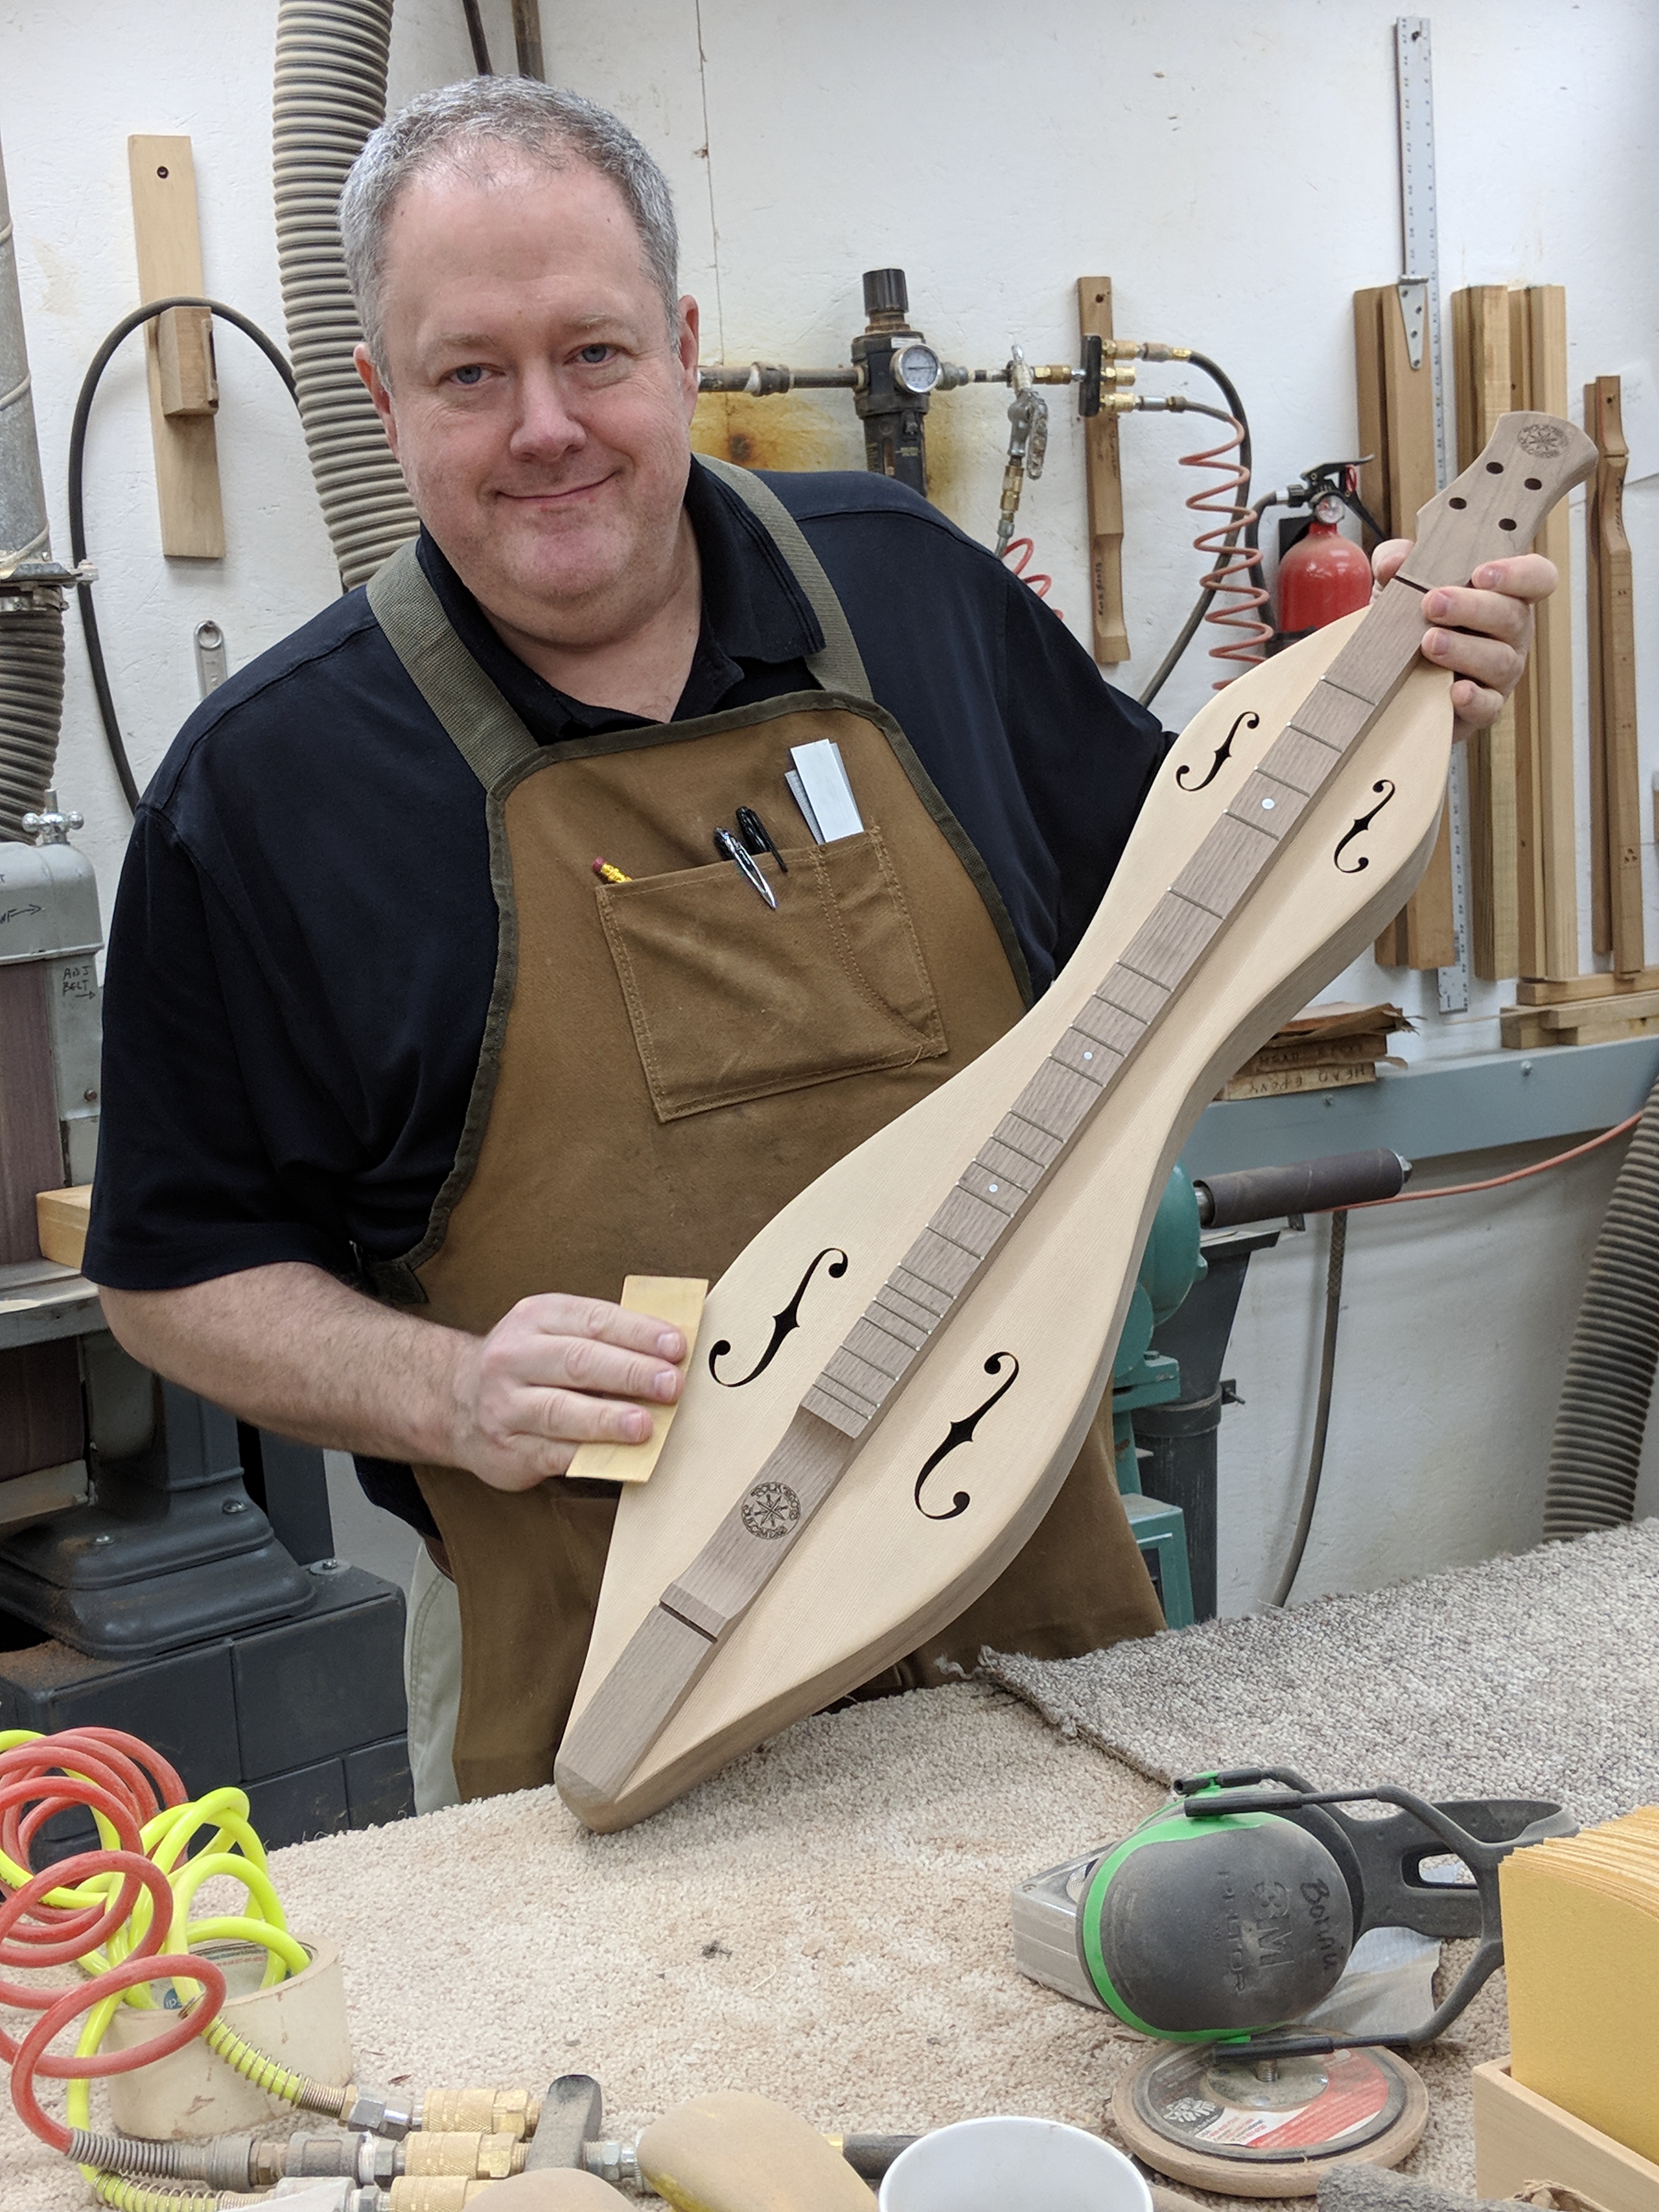 Richard Ash is putting the finishing touches on a FolkRoots mountain dulcimer. Hand sanding is a big part of making an instrument feel good to the player's touch.